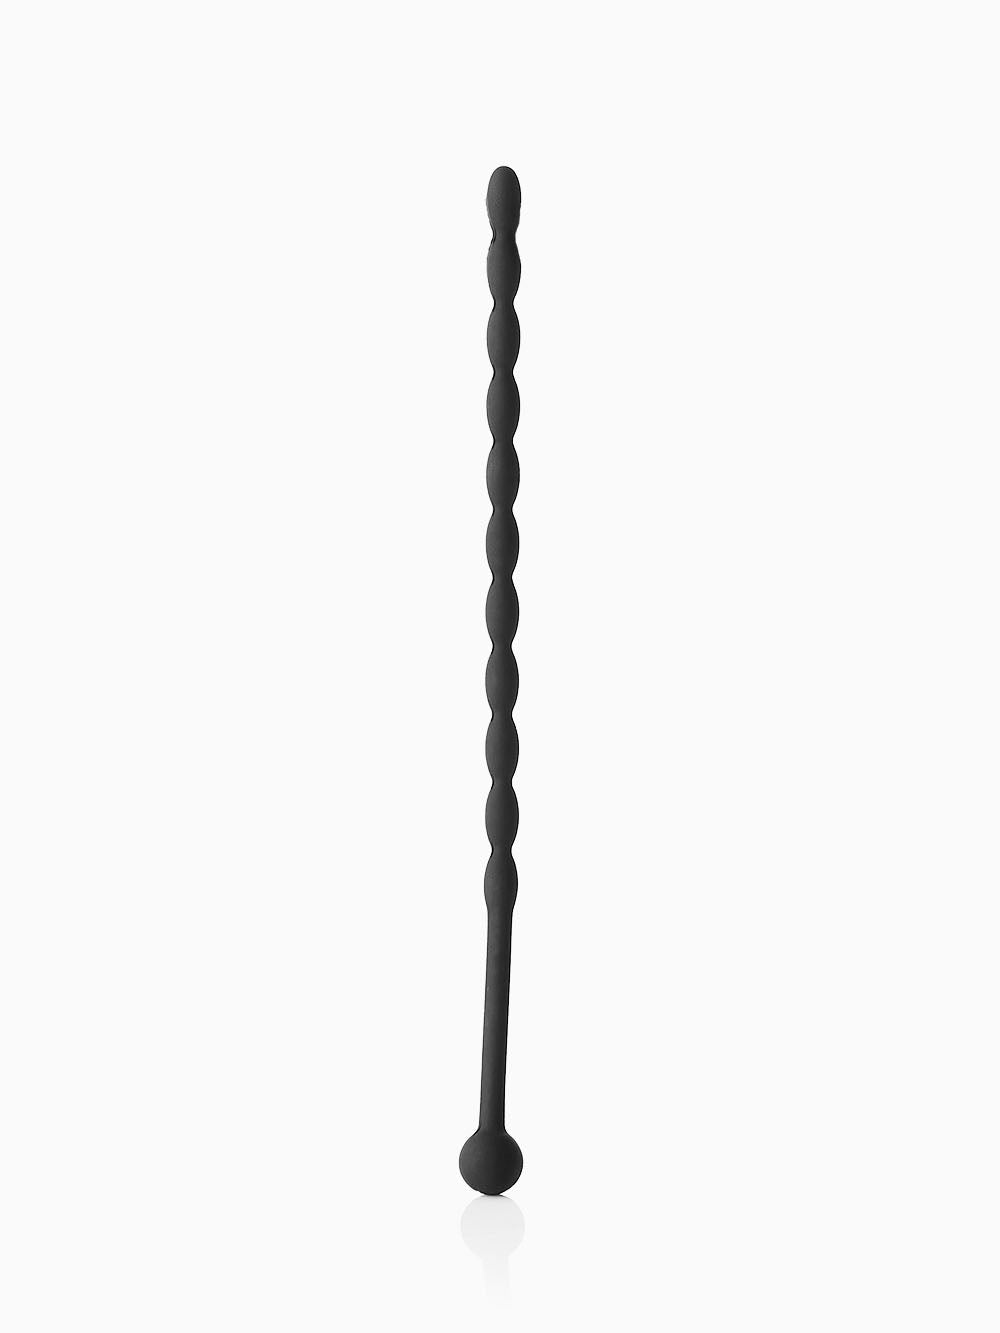 Pillow Talk Urethral Rod with Stopper 5.75 Inches